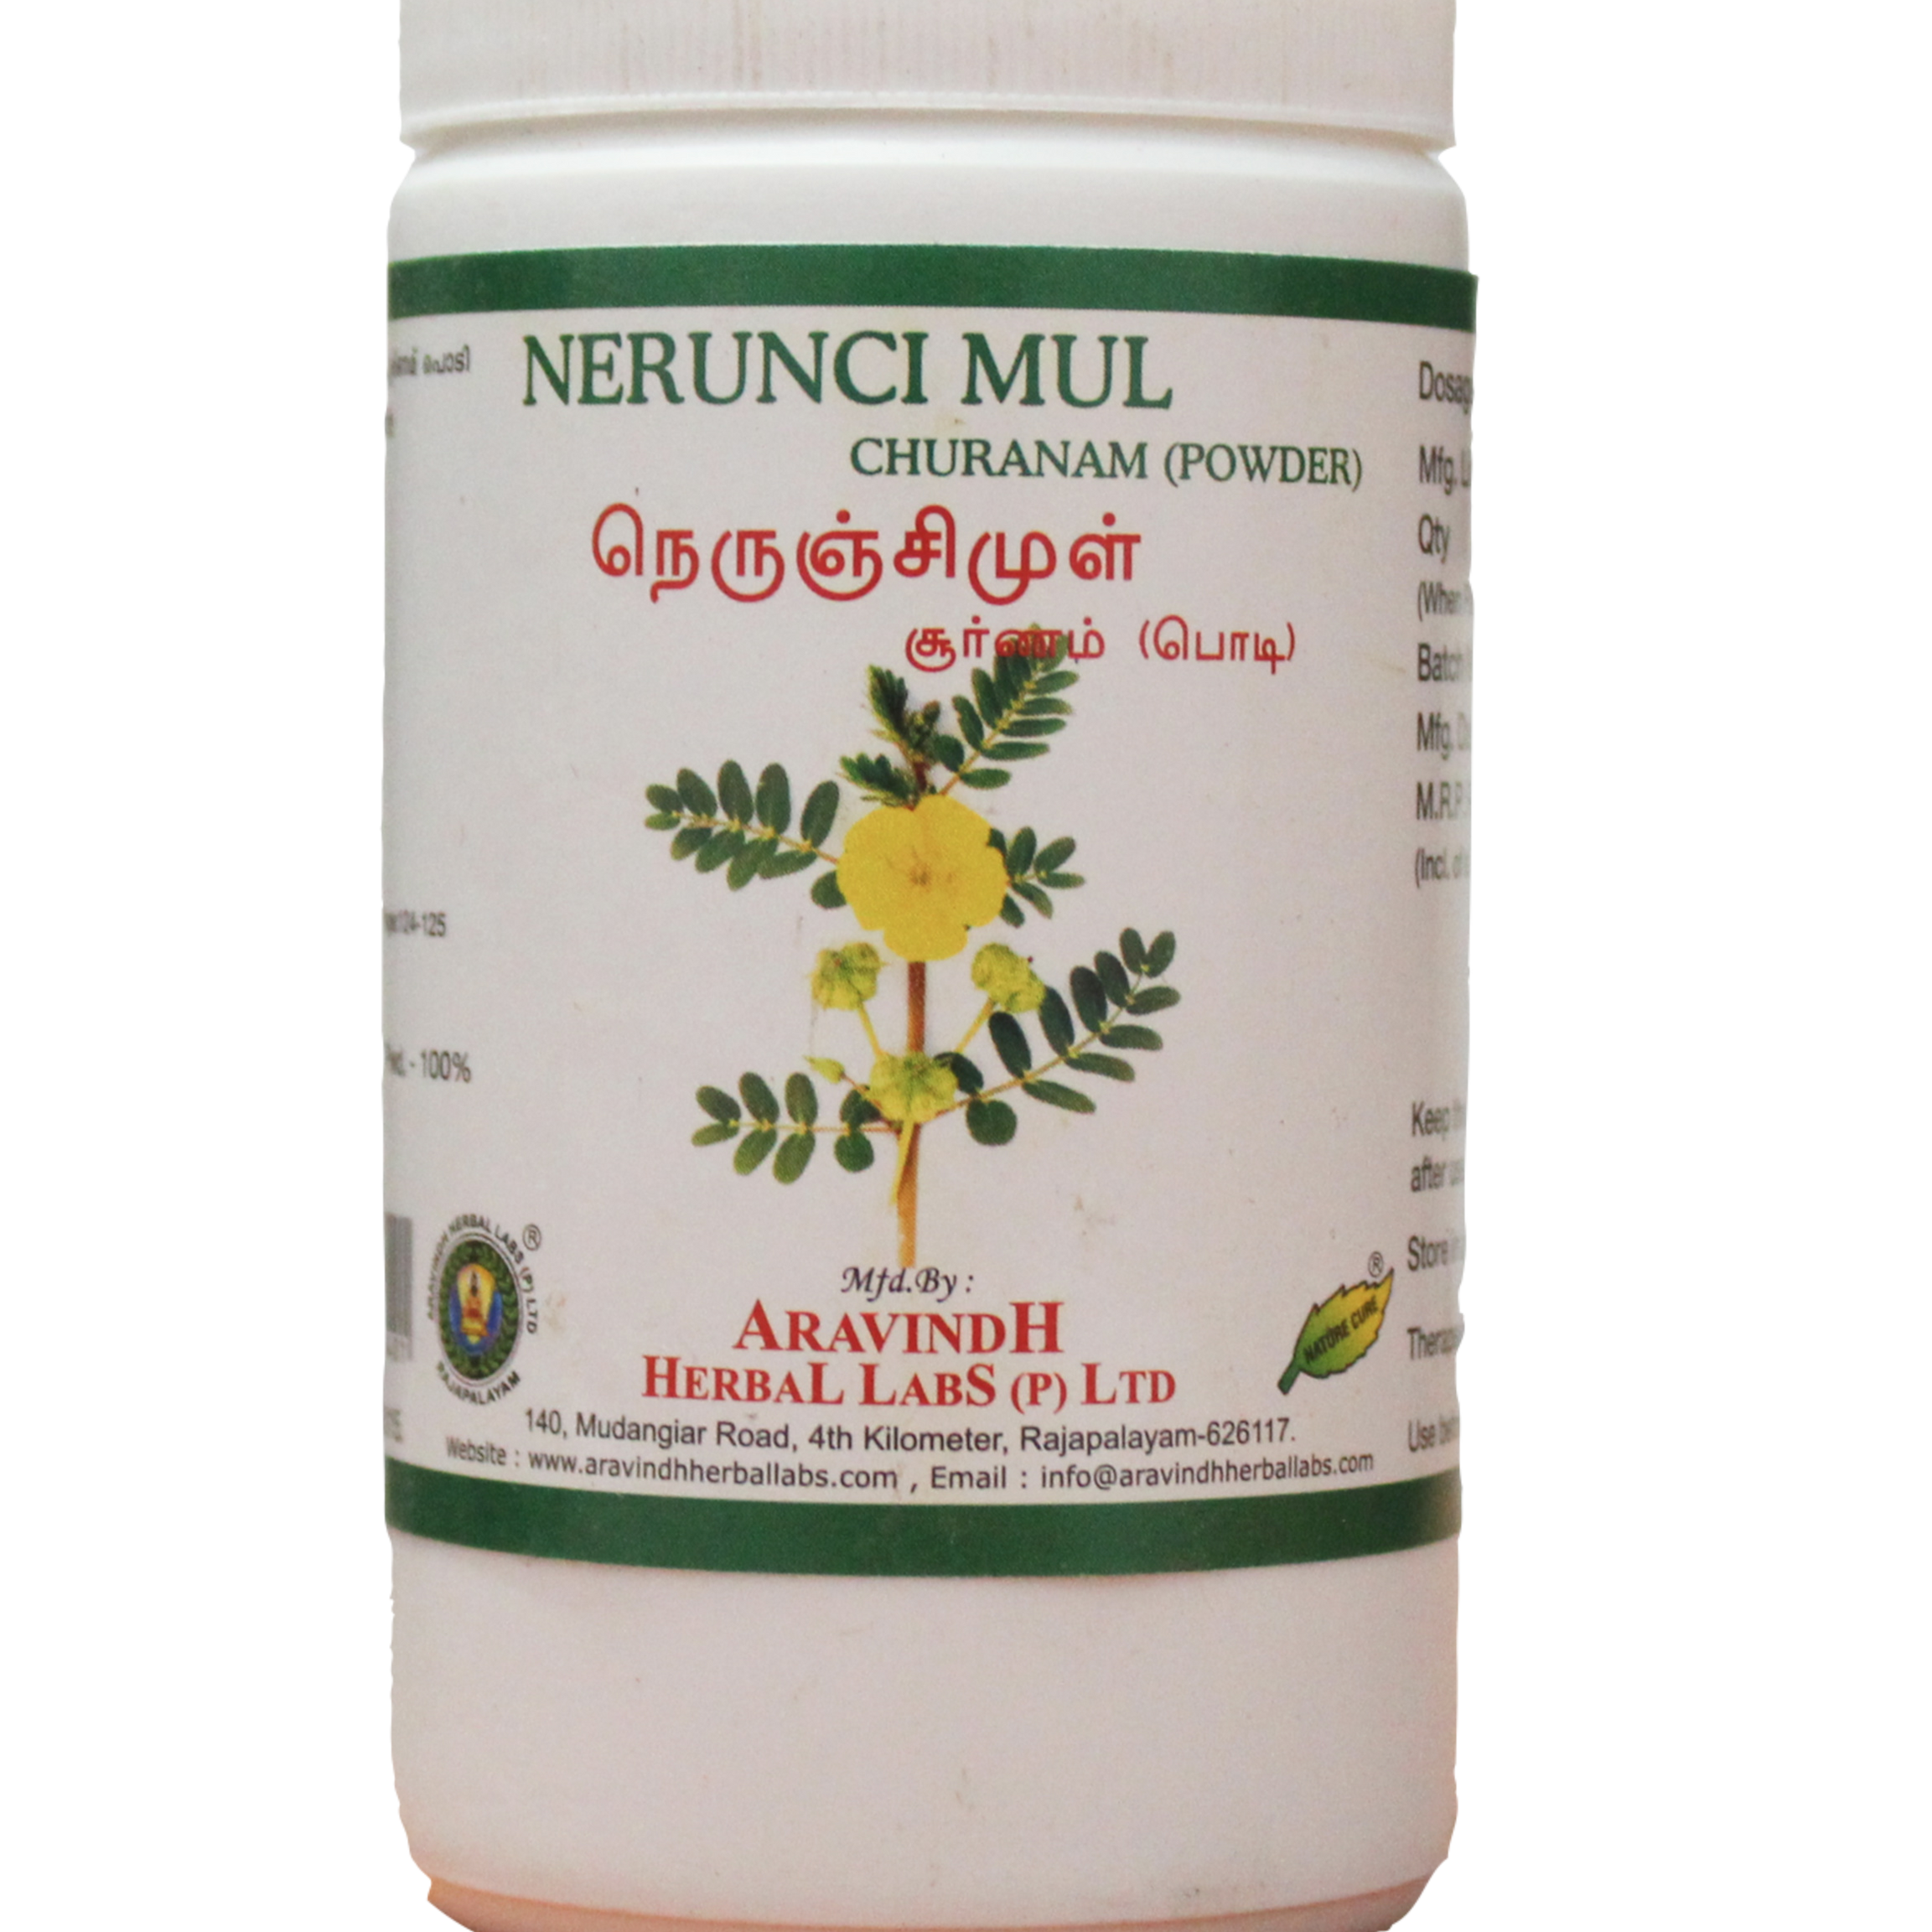 Shop Nerunjimul Powder 50gm at price 40.00 from Aravindh Online - Ayush Care